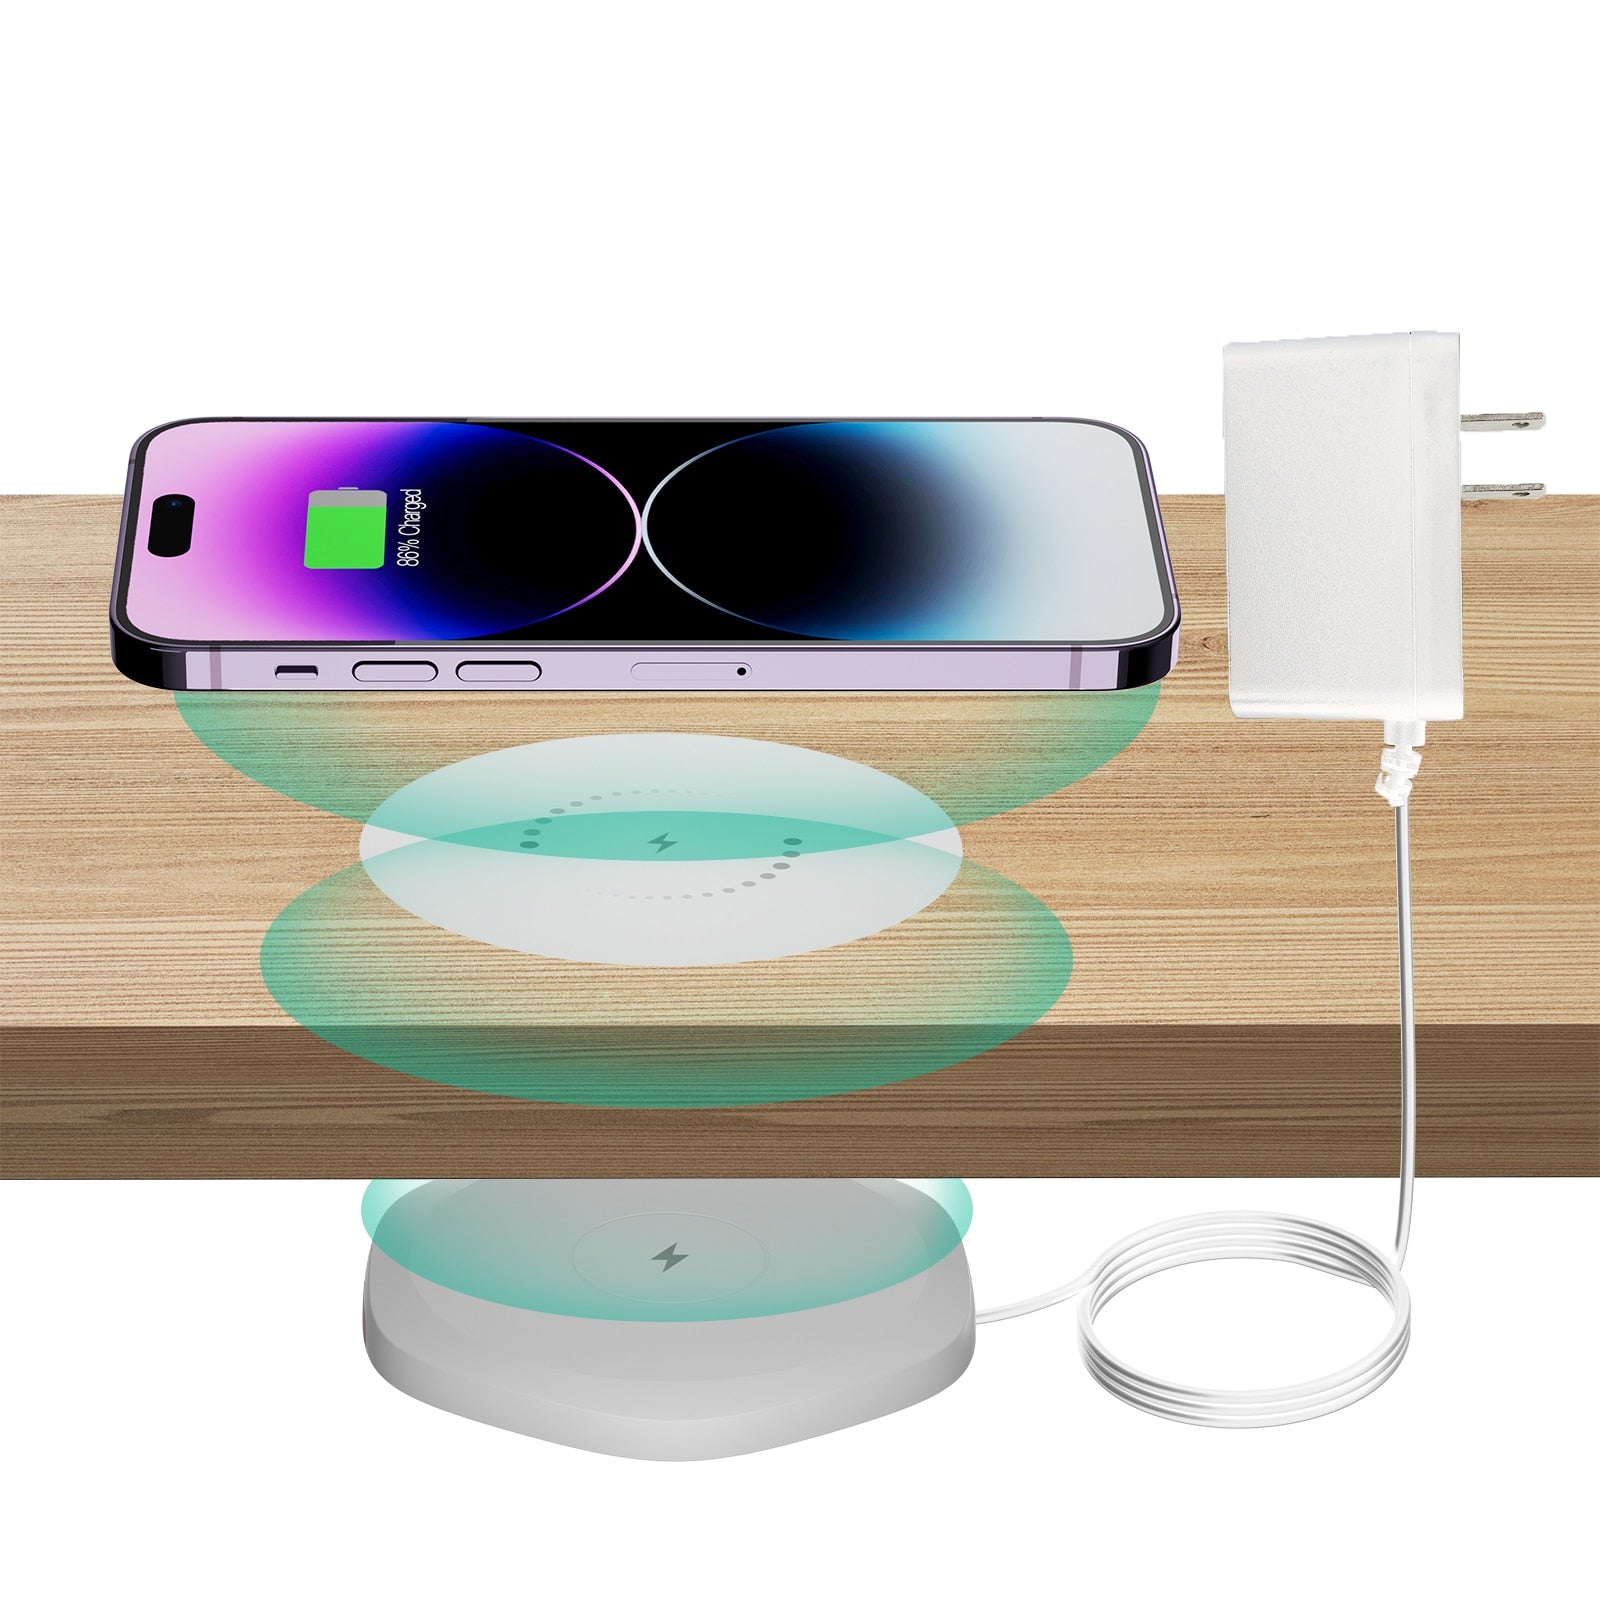 KPON Invisible Wireless Charger 30mm Under Table QI Charger Furniture Desk Wireless Charging Station for iPhone 14/13/12/11/X/8